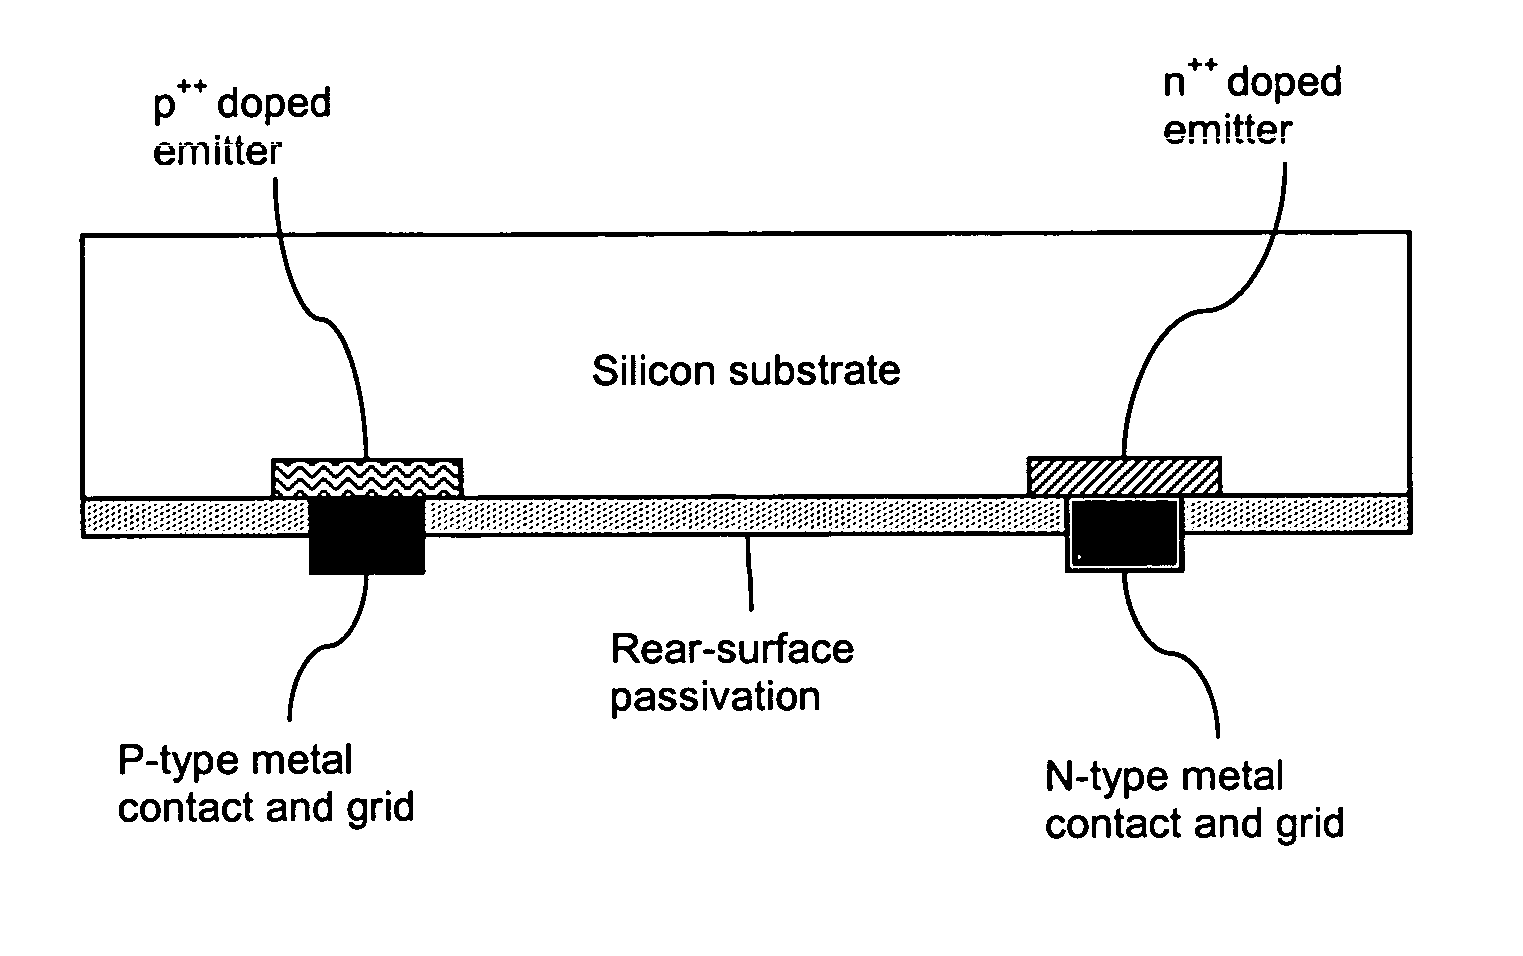 Contact fabrication of emitter wrap-through back contact silicon solar cells